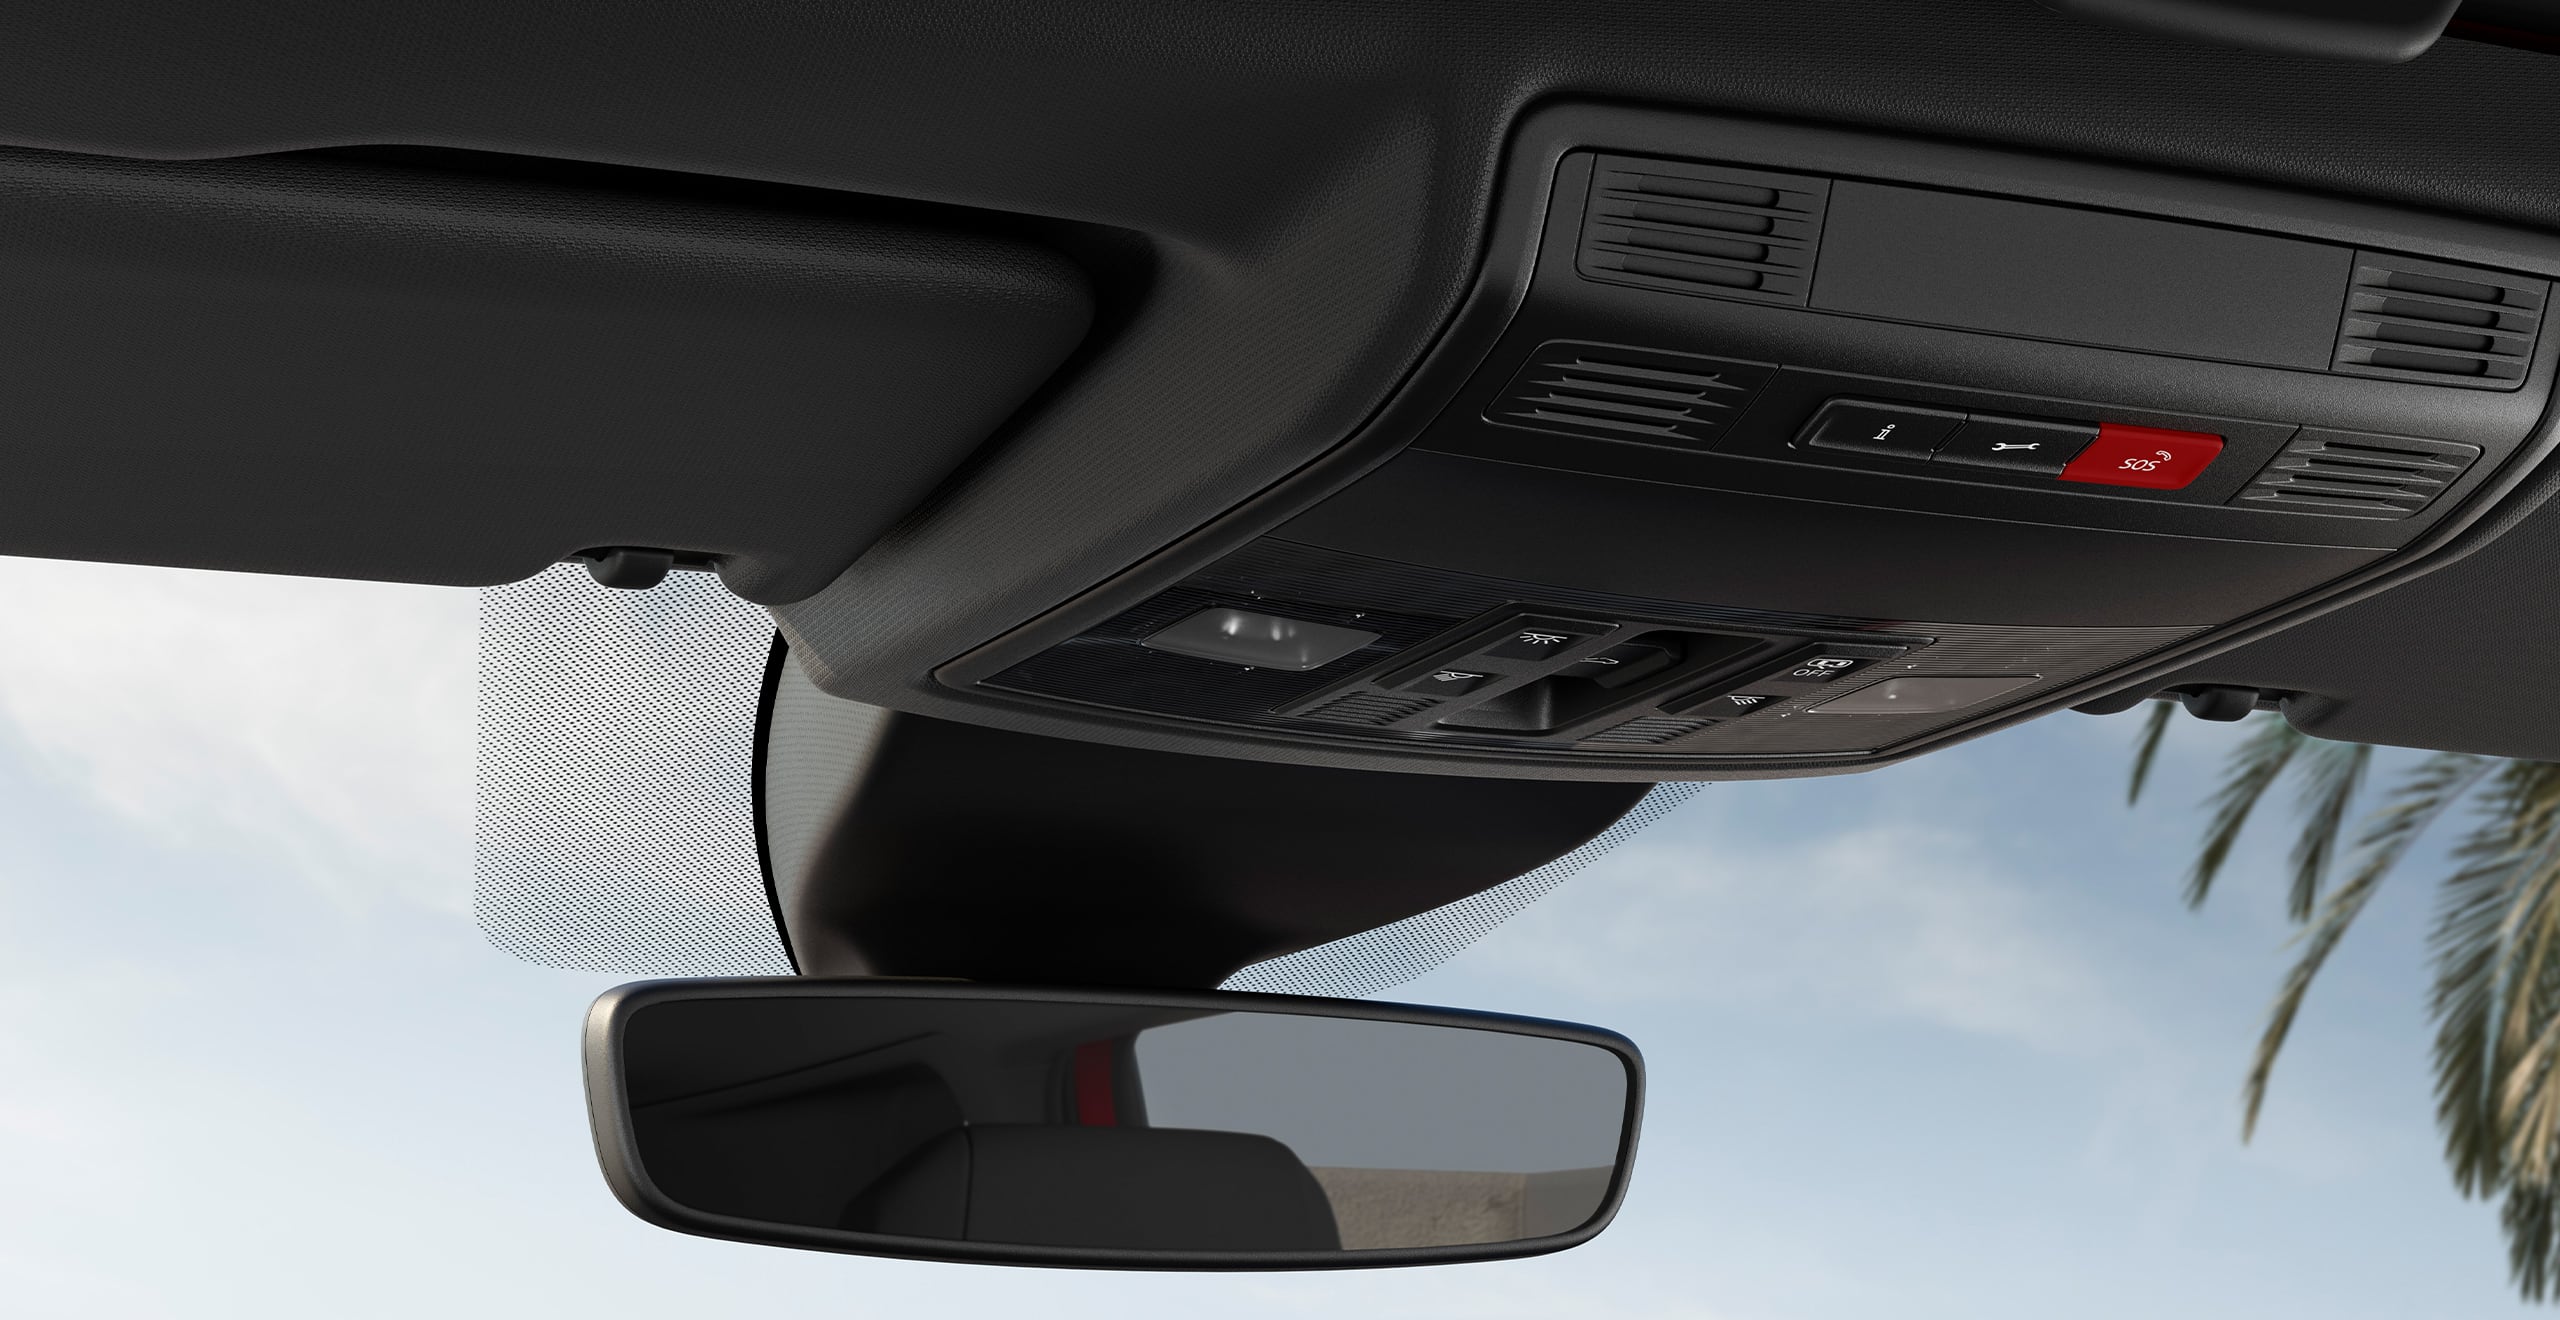 SEAT Ibiza interior view of the rear mirror and call assistance 